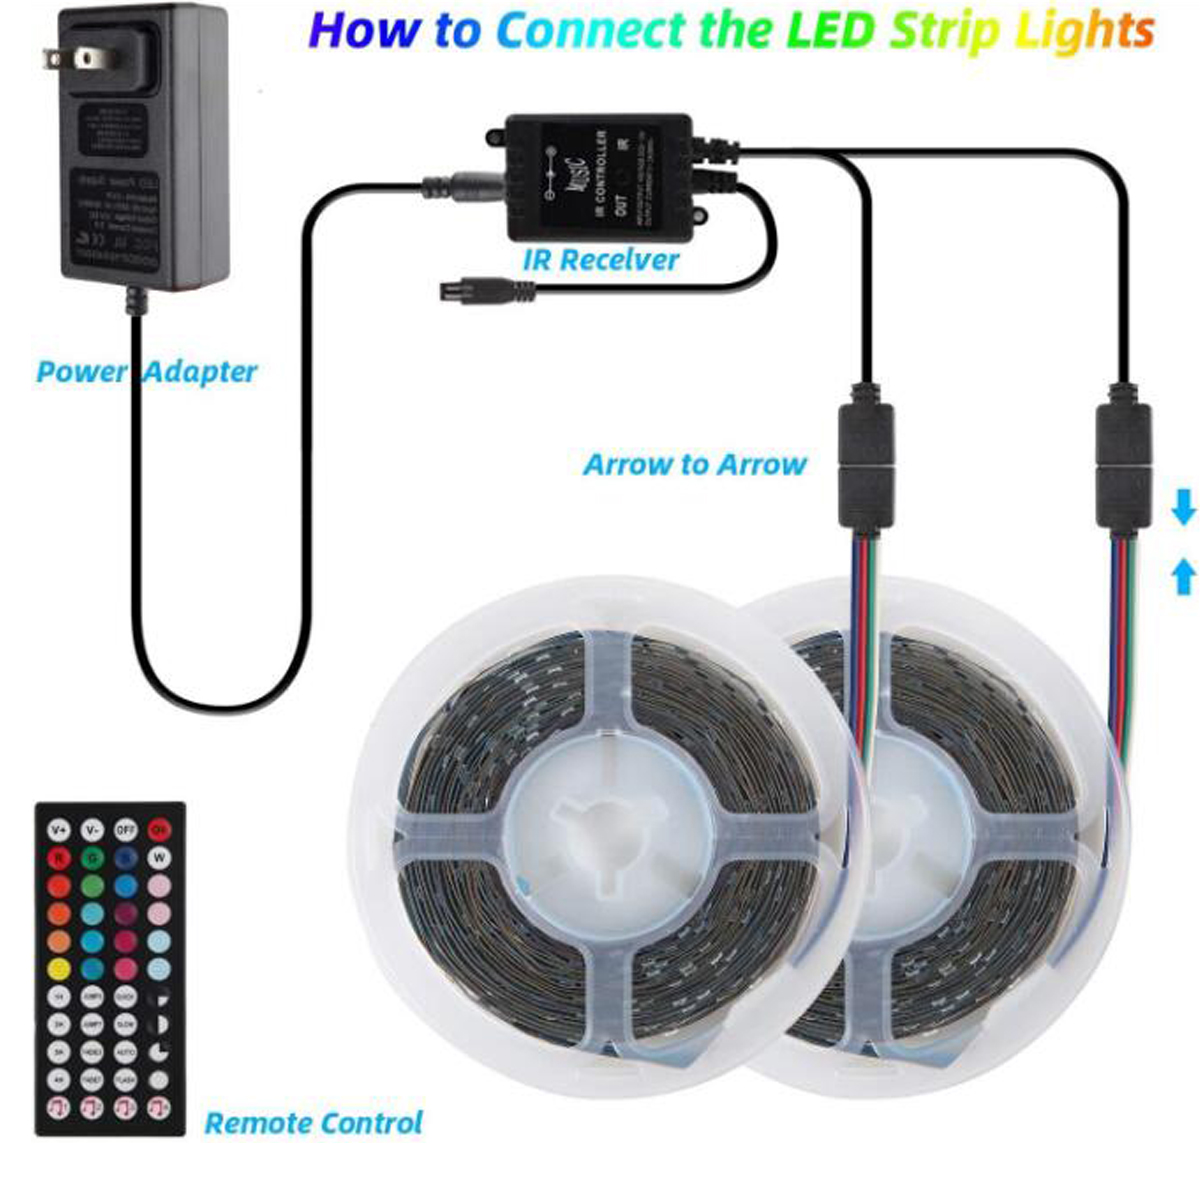 2x5M-Music-Sound-Activated-LED-Strip-Light-Waterproof-3528-RGB-Tape-Under-Cabinet-Kitchen-Lamp-Set---1730238-7